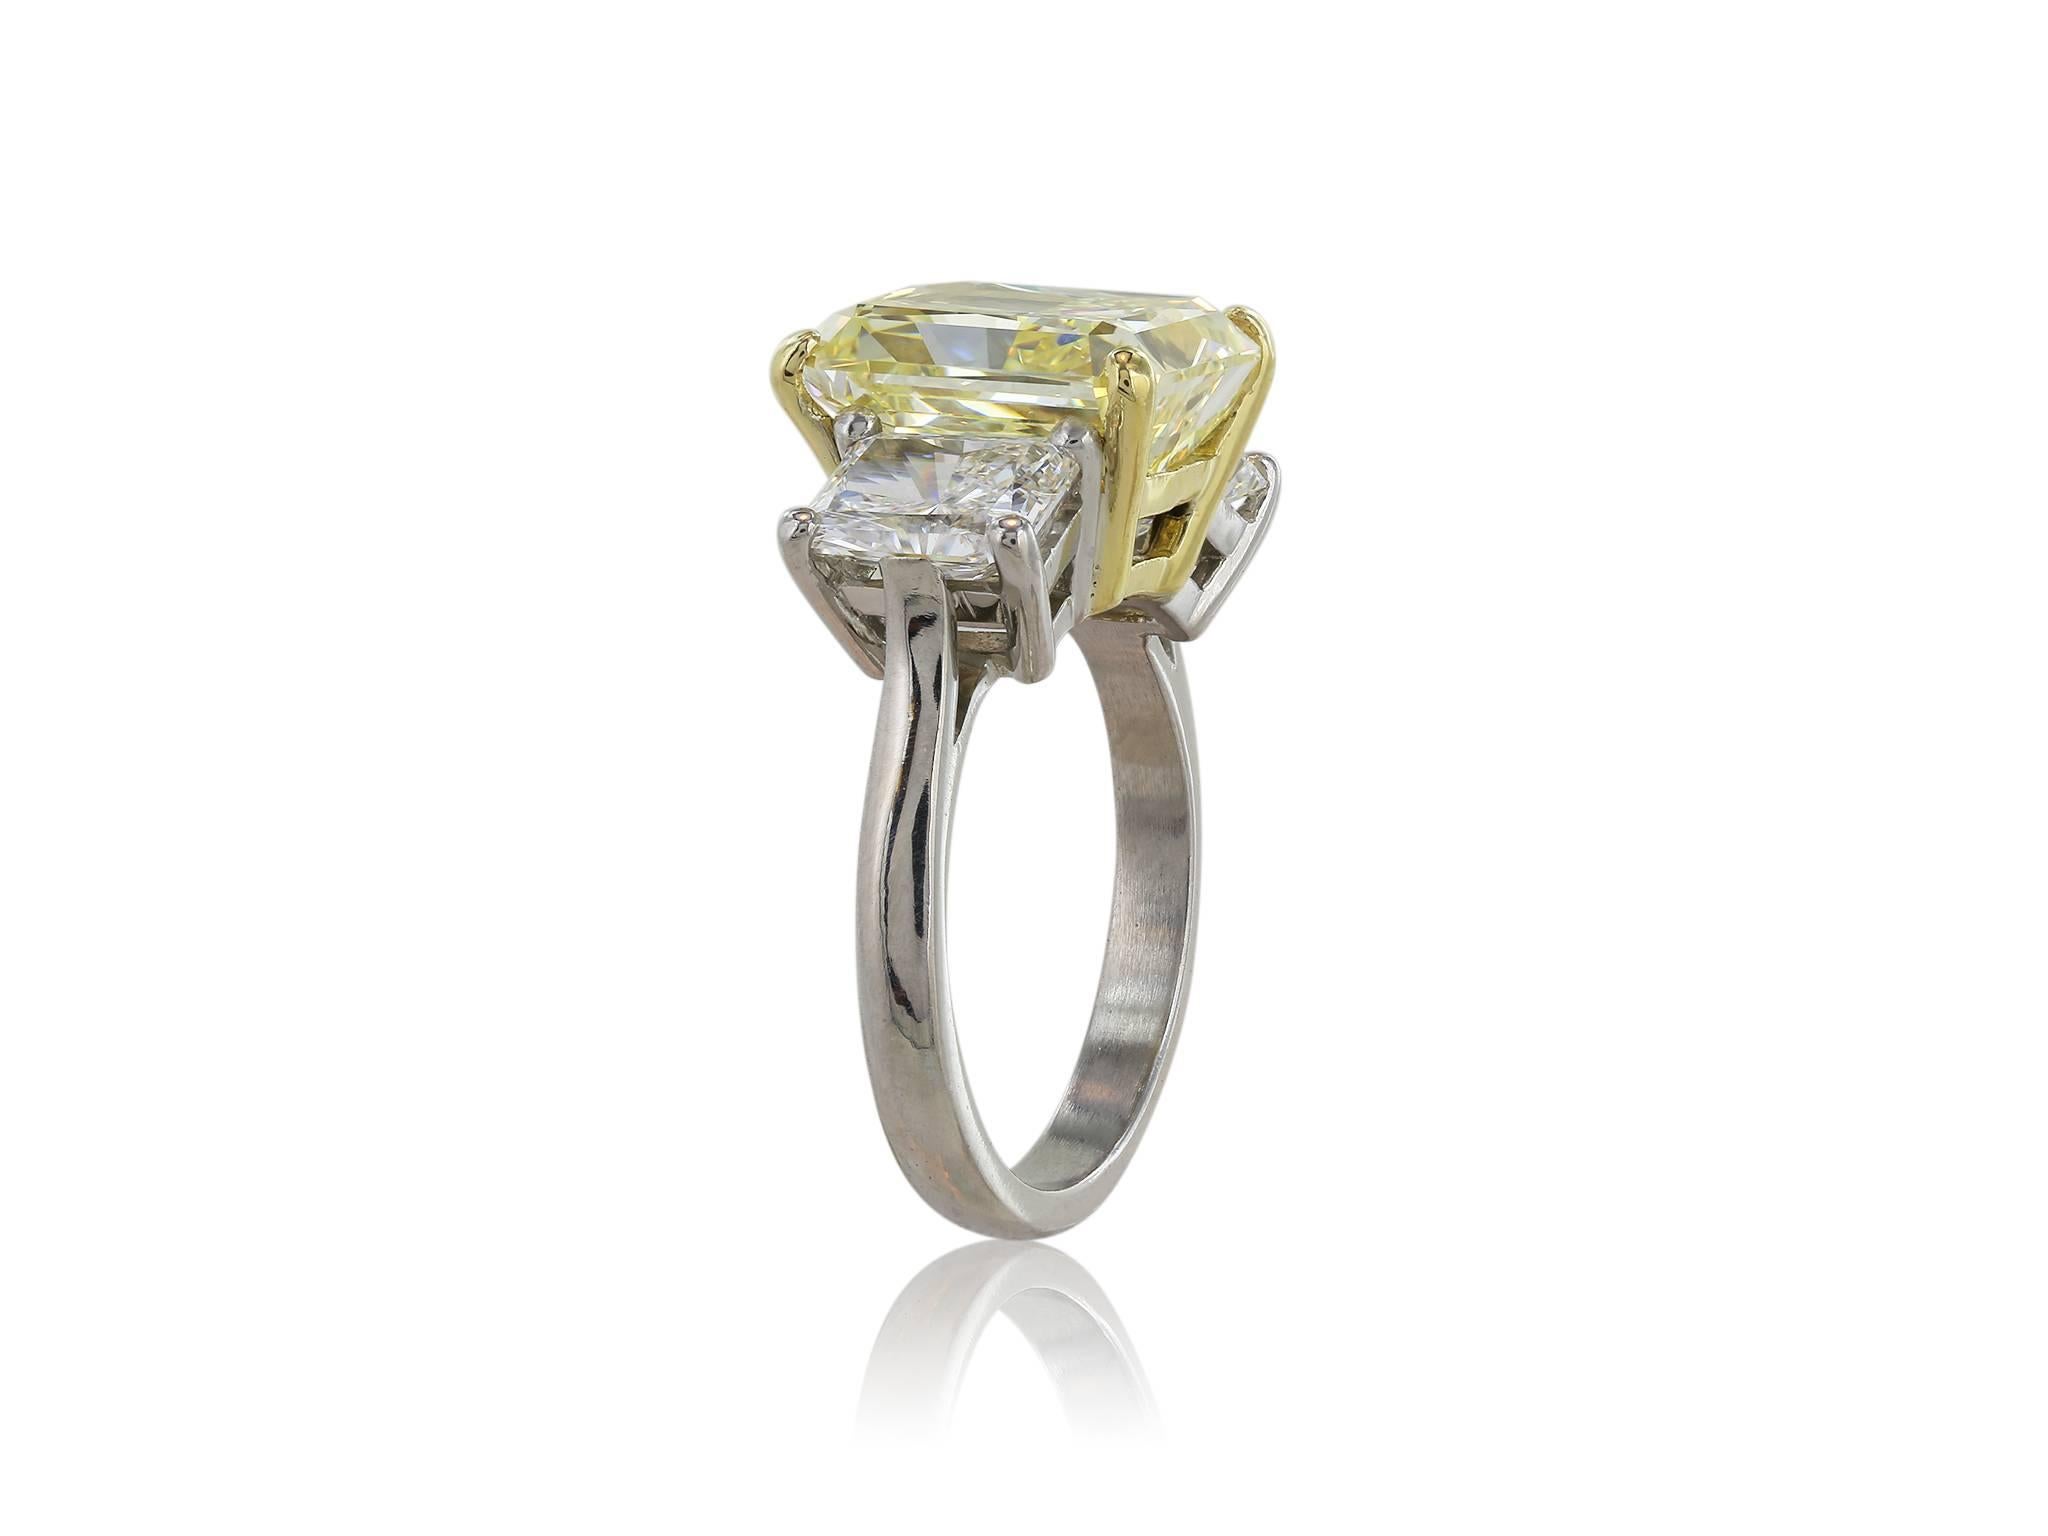 Platinum 3 stone natural canary ring consisting of 1 fancy yellow radiant cut diamond weighing 5.87 carats measuring 10.58 x 9.58 x 6.25 mm, color and clarity of FY/VS2 with GIA Report 12239258,flanked by 2 radiant cut white diamonds with a total